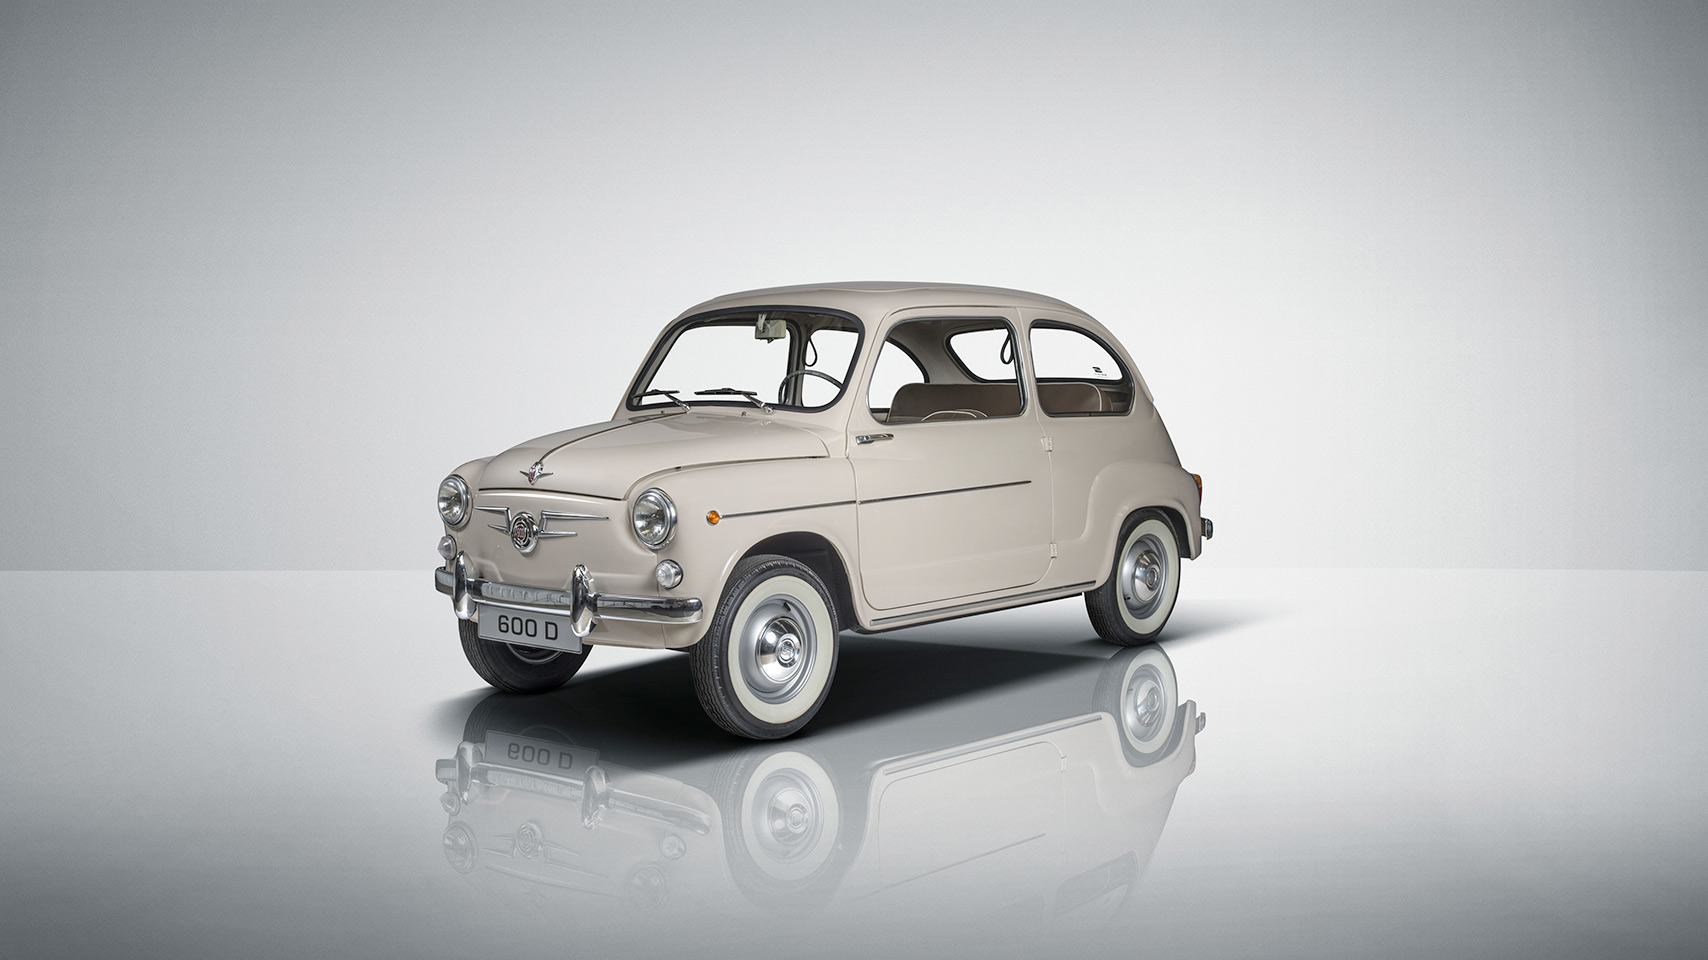 70 years of history – SEAT’s ability to reinvent itself.